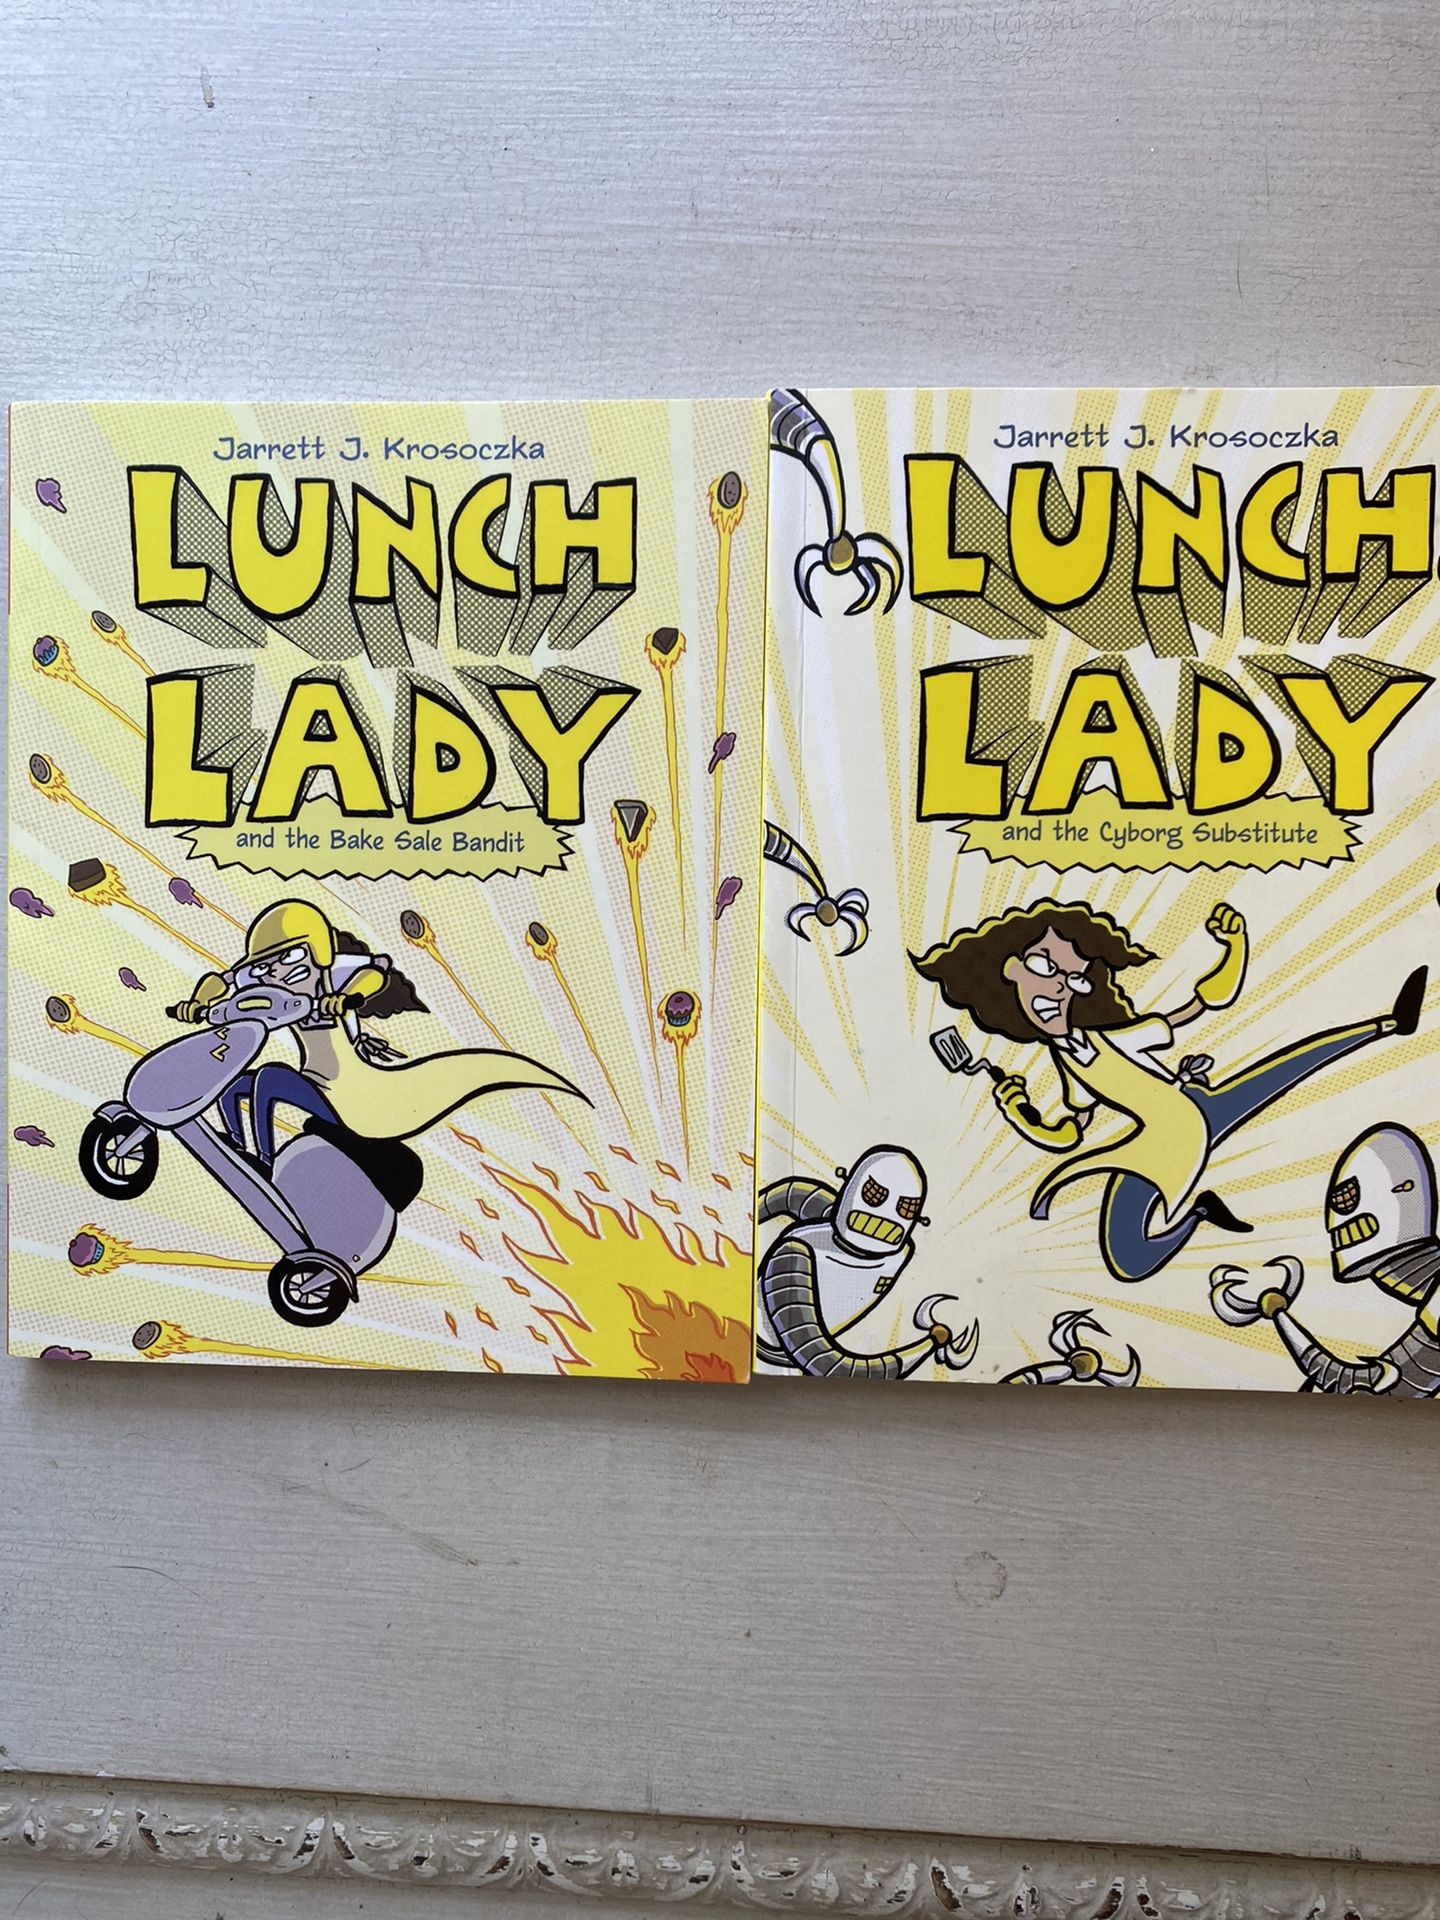 Two new graphic novel books-Lunch lady